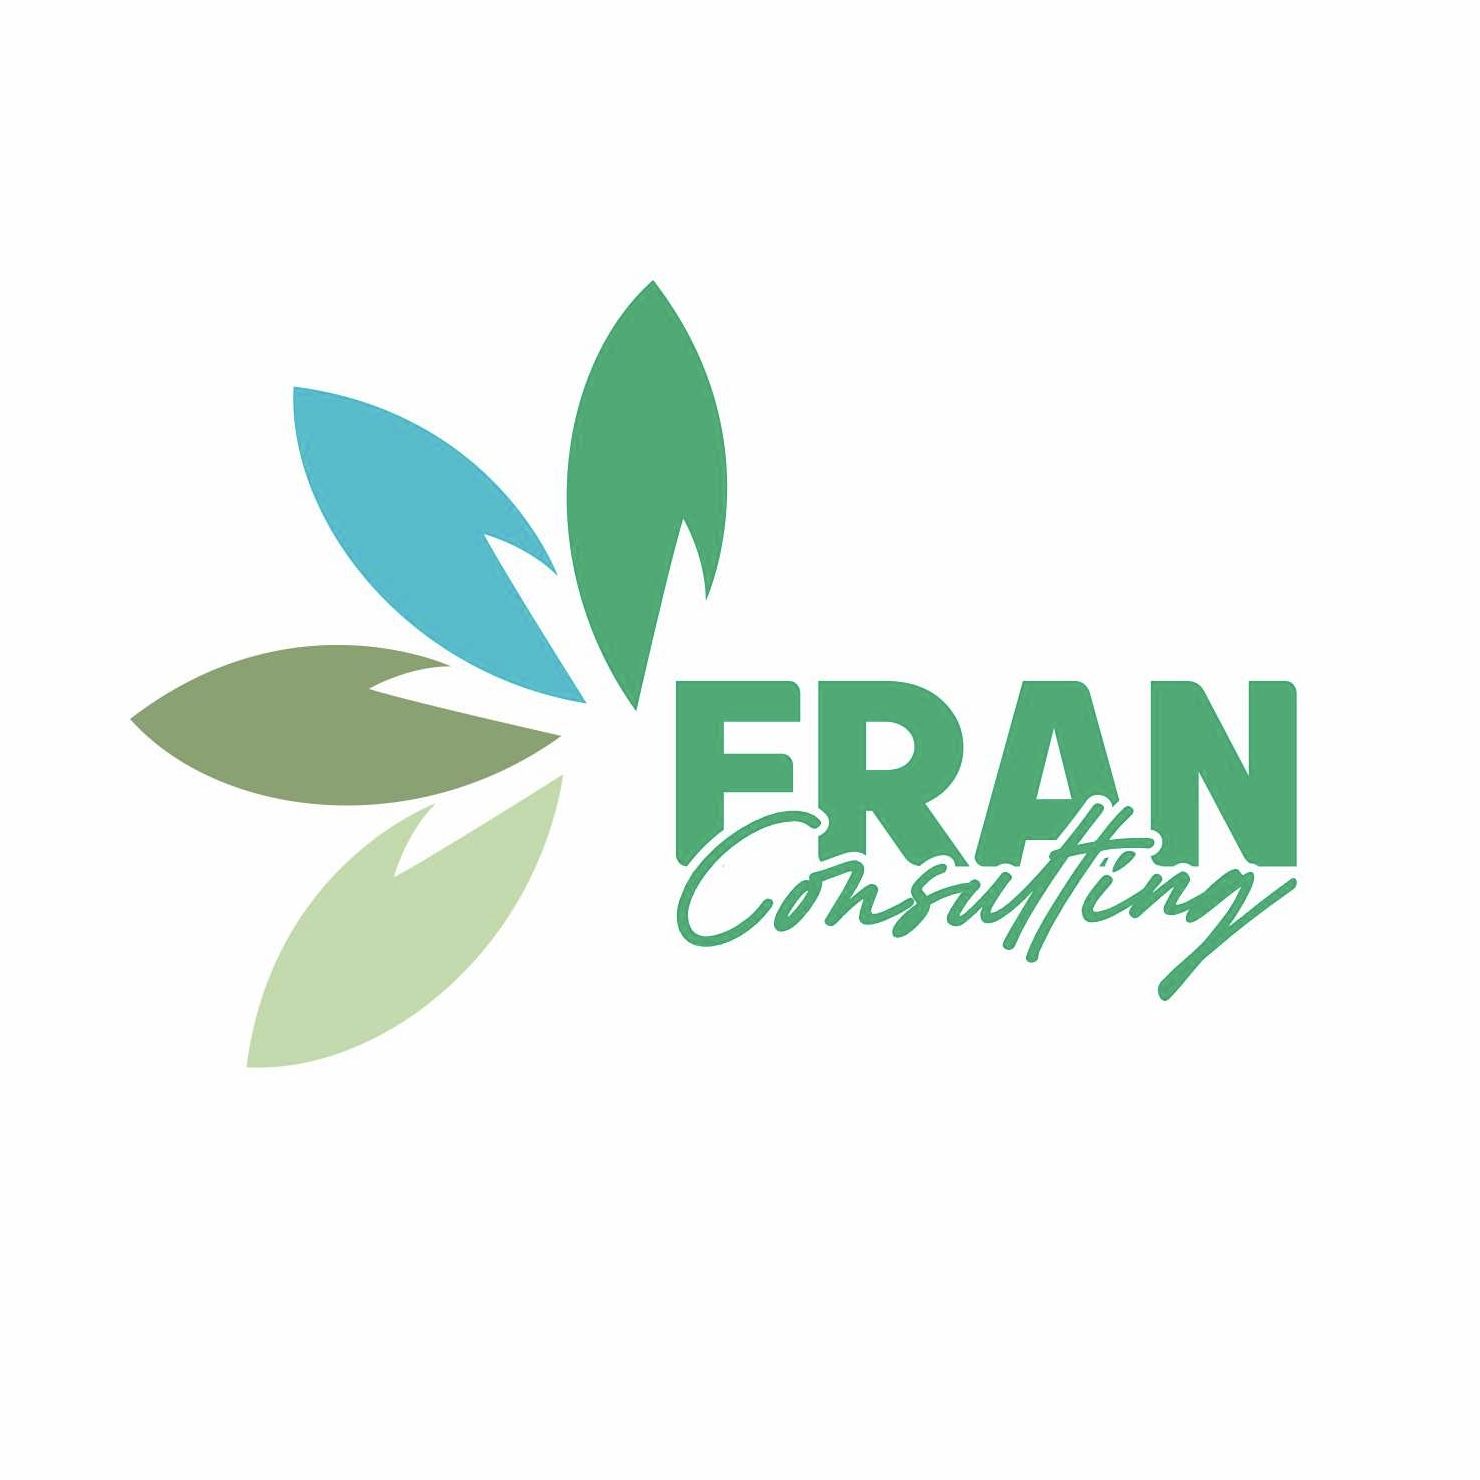 FRAN Consulting Indonesia